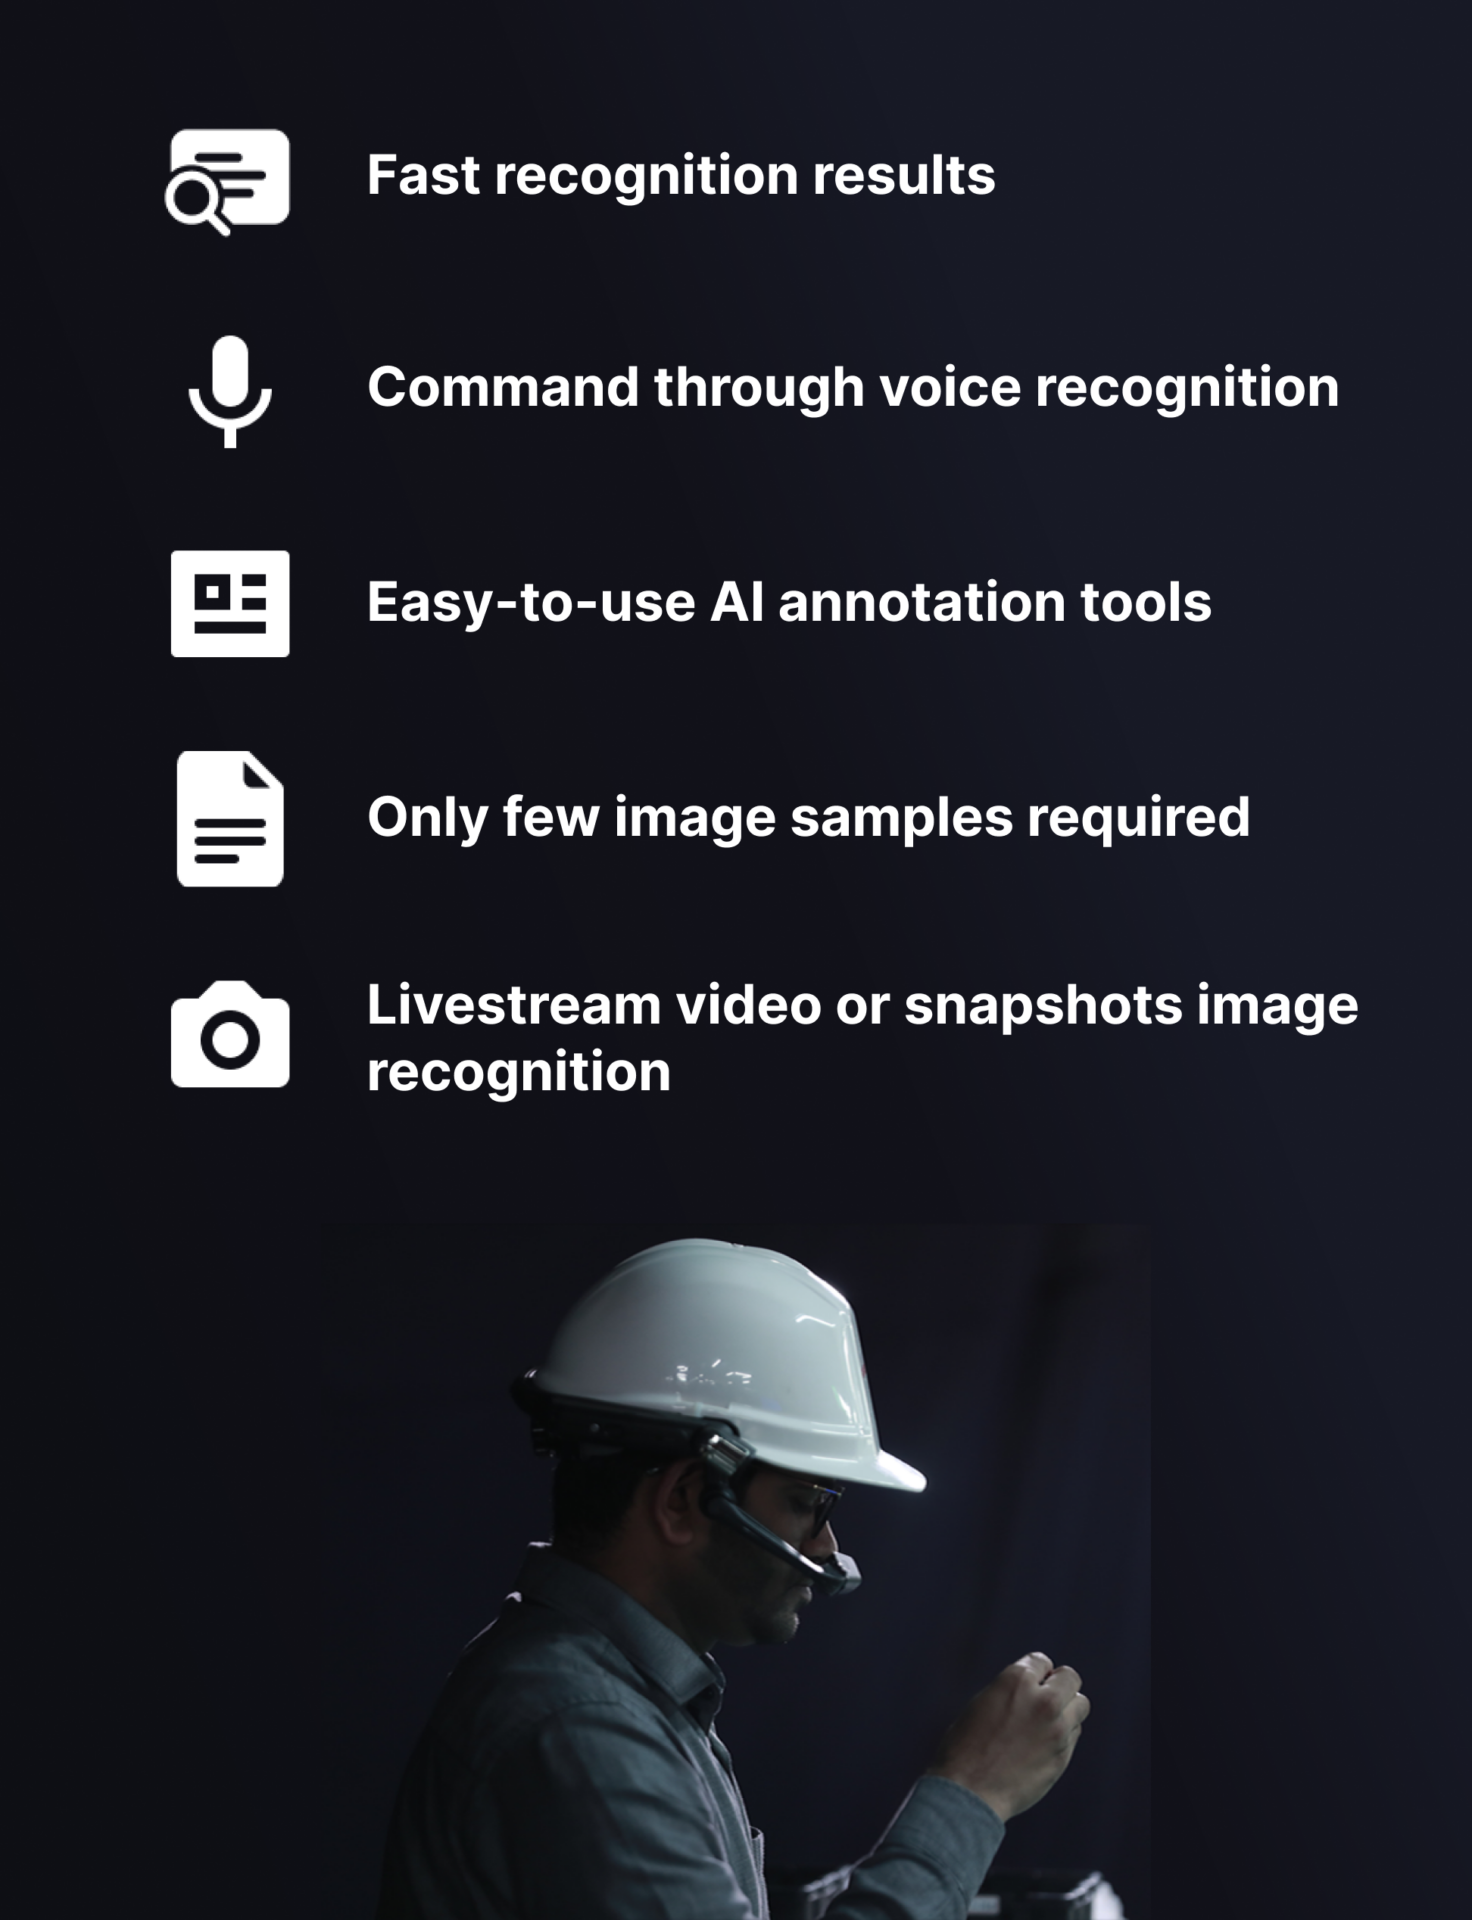 list of META-aivi features above a man wearing white hardhat and AR glasses inspecting an object in his right hand